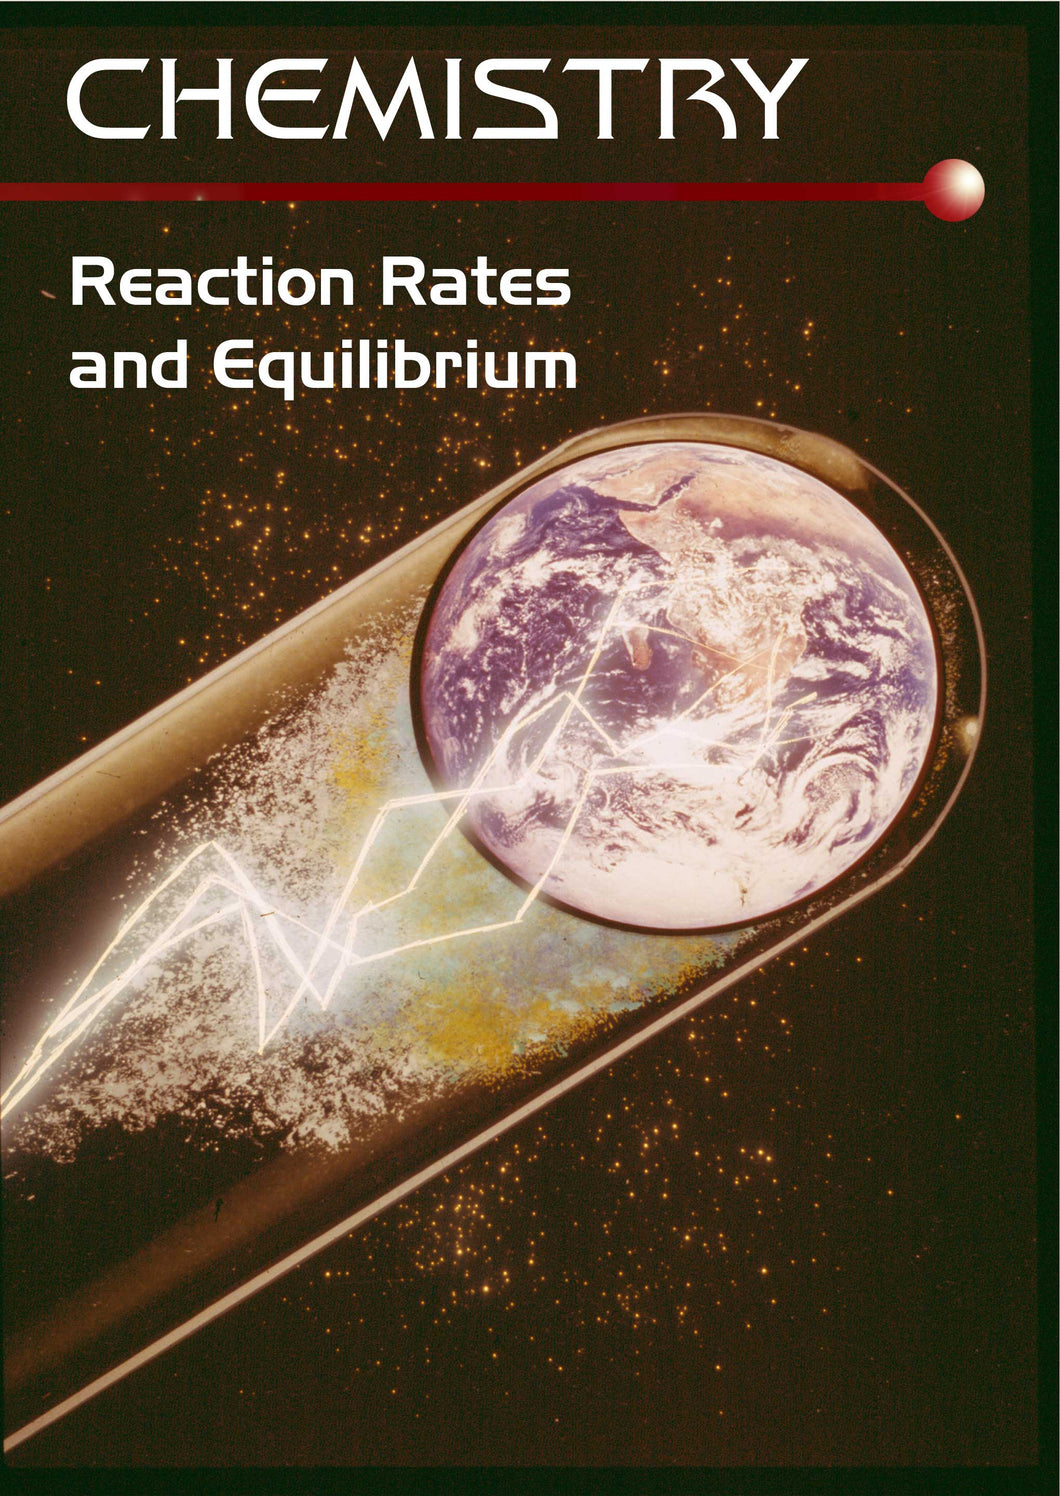 Chemistry Series:  Reaction Rates and Equilibrium